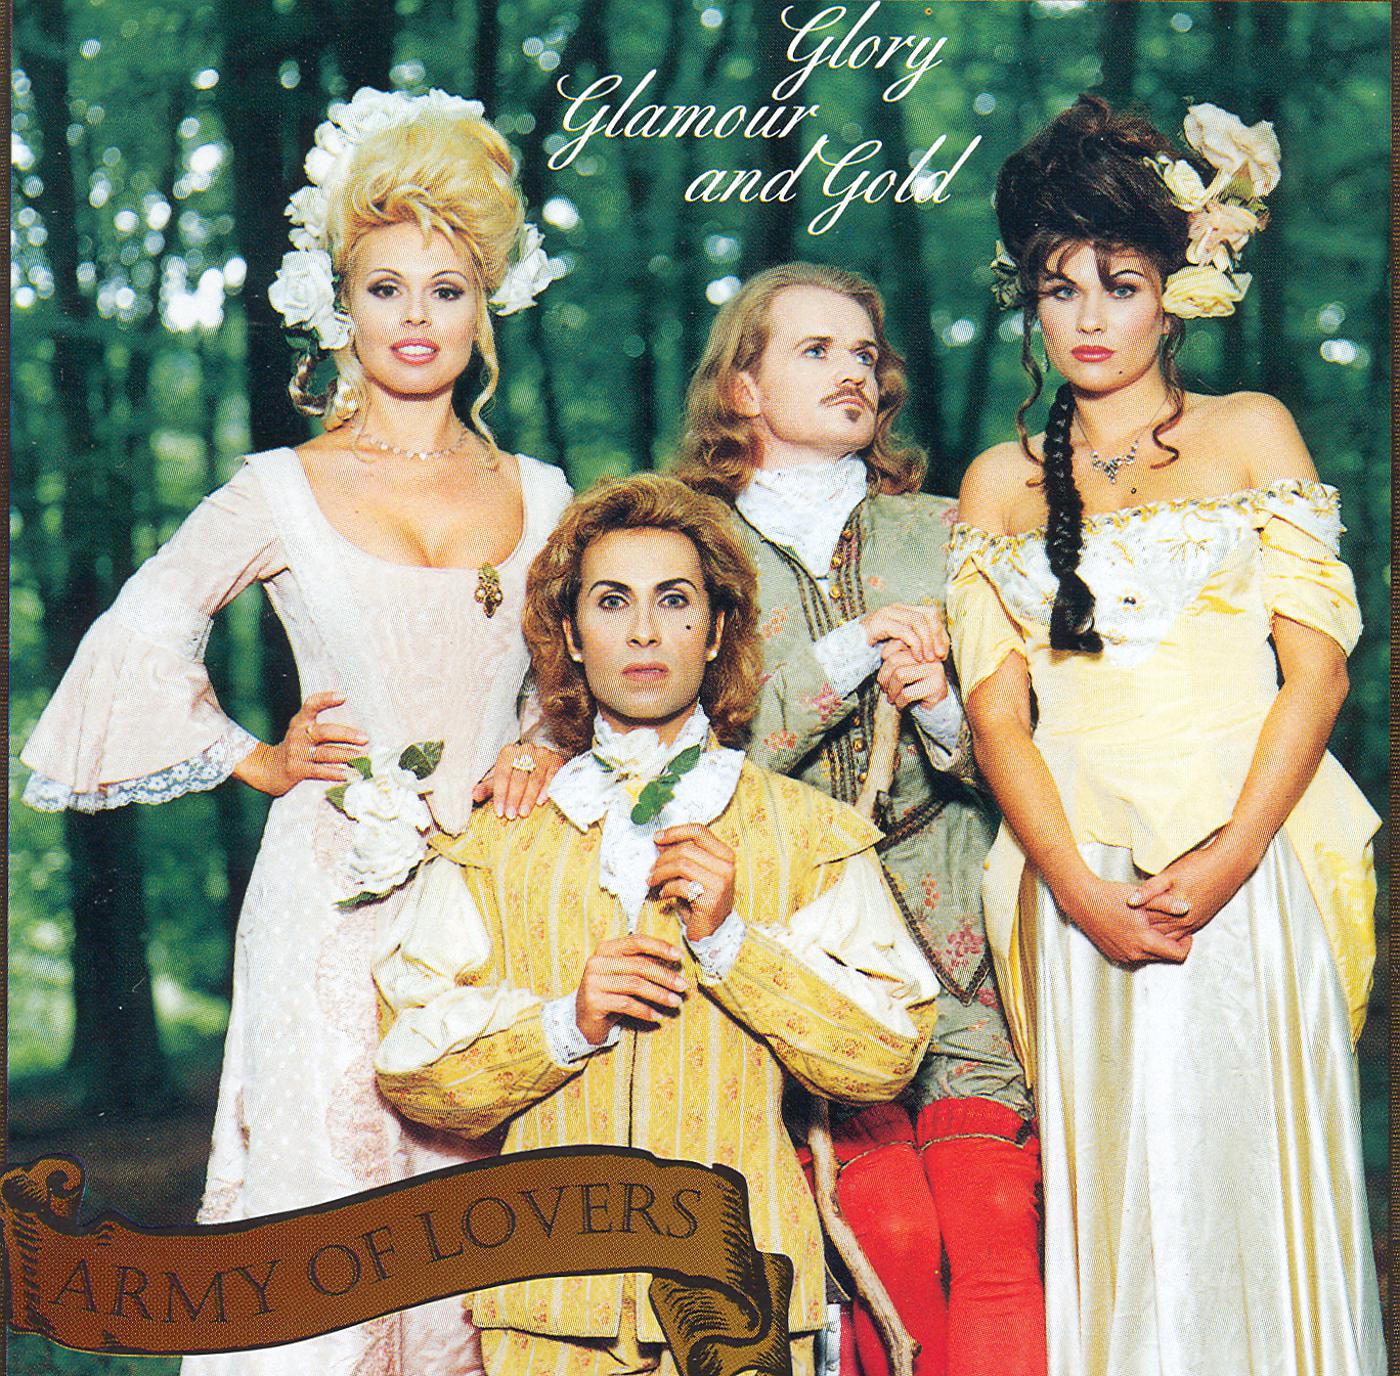 Army of lovers Glory Glamour and Gold 1994. Army of lovers. Группа АРМИ оф лаверс. Army of lovers 1994.